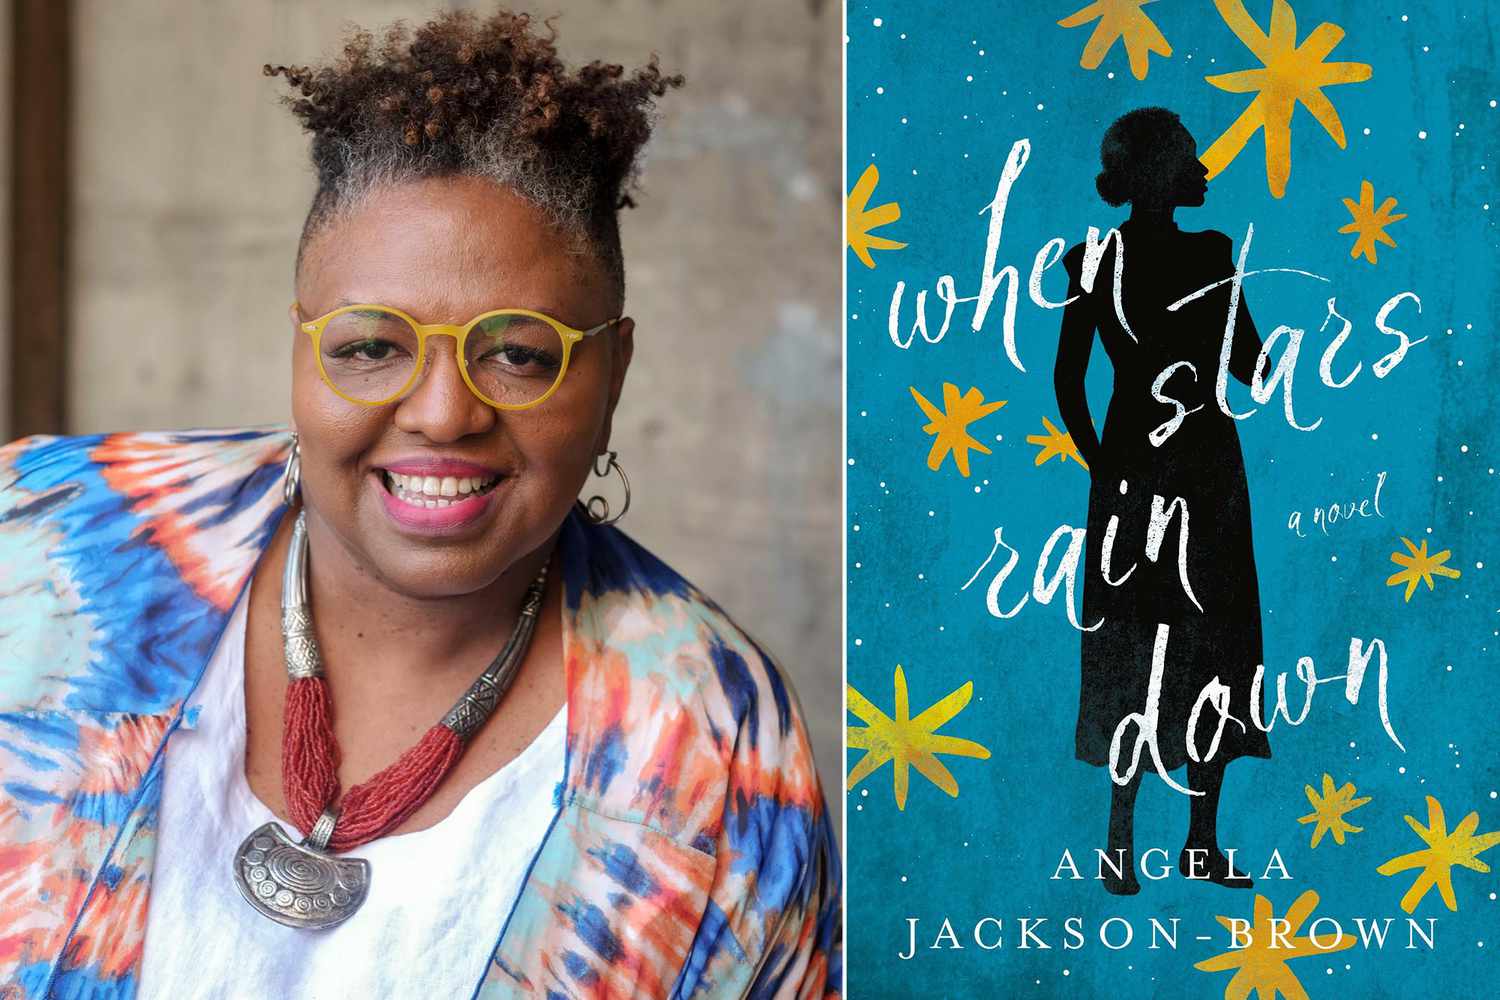 Crystal Wilkinson recommends When Stars Rain Down by Angela Jackson-Brown